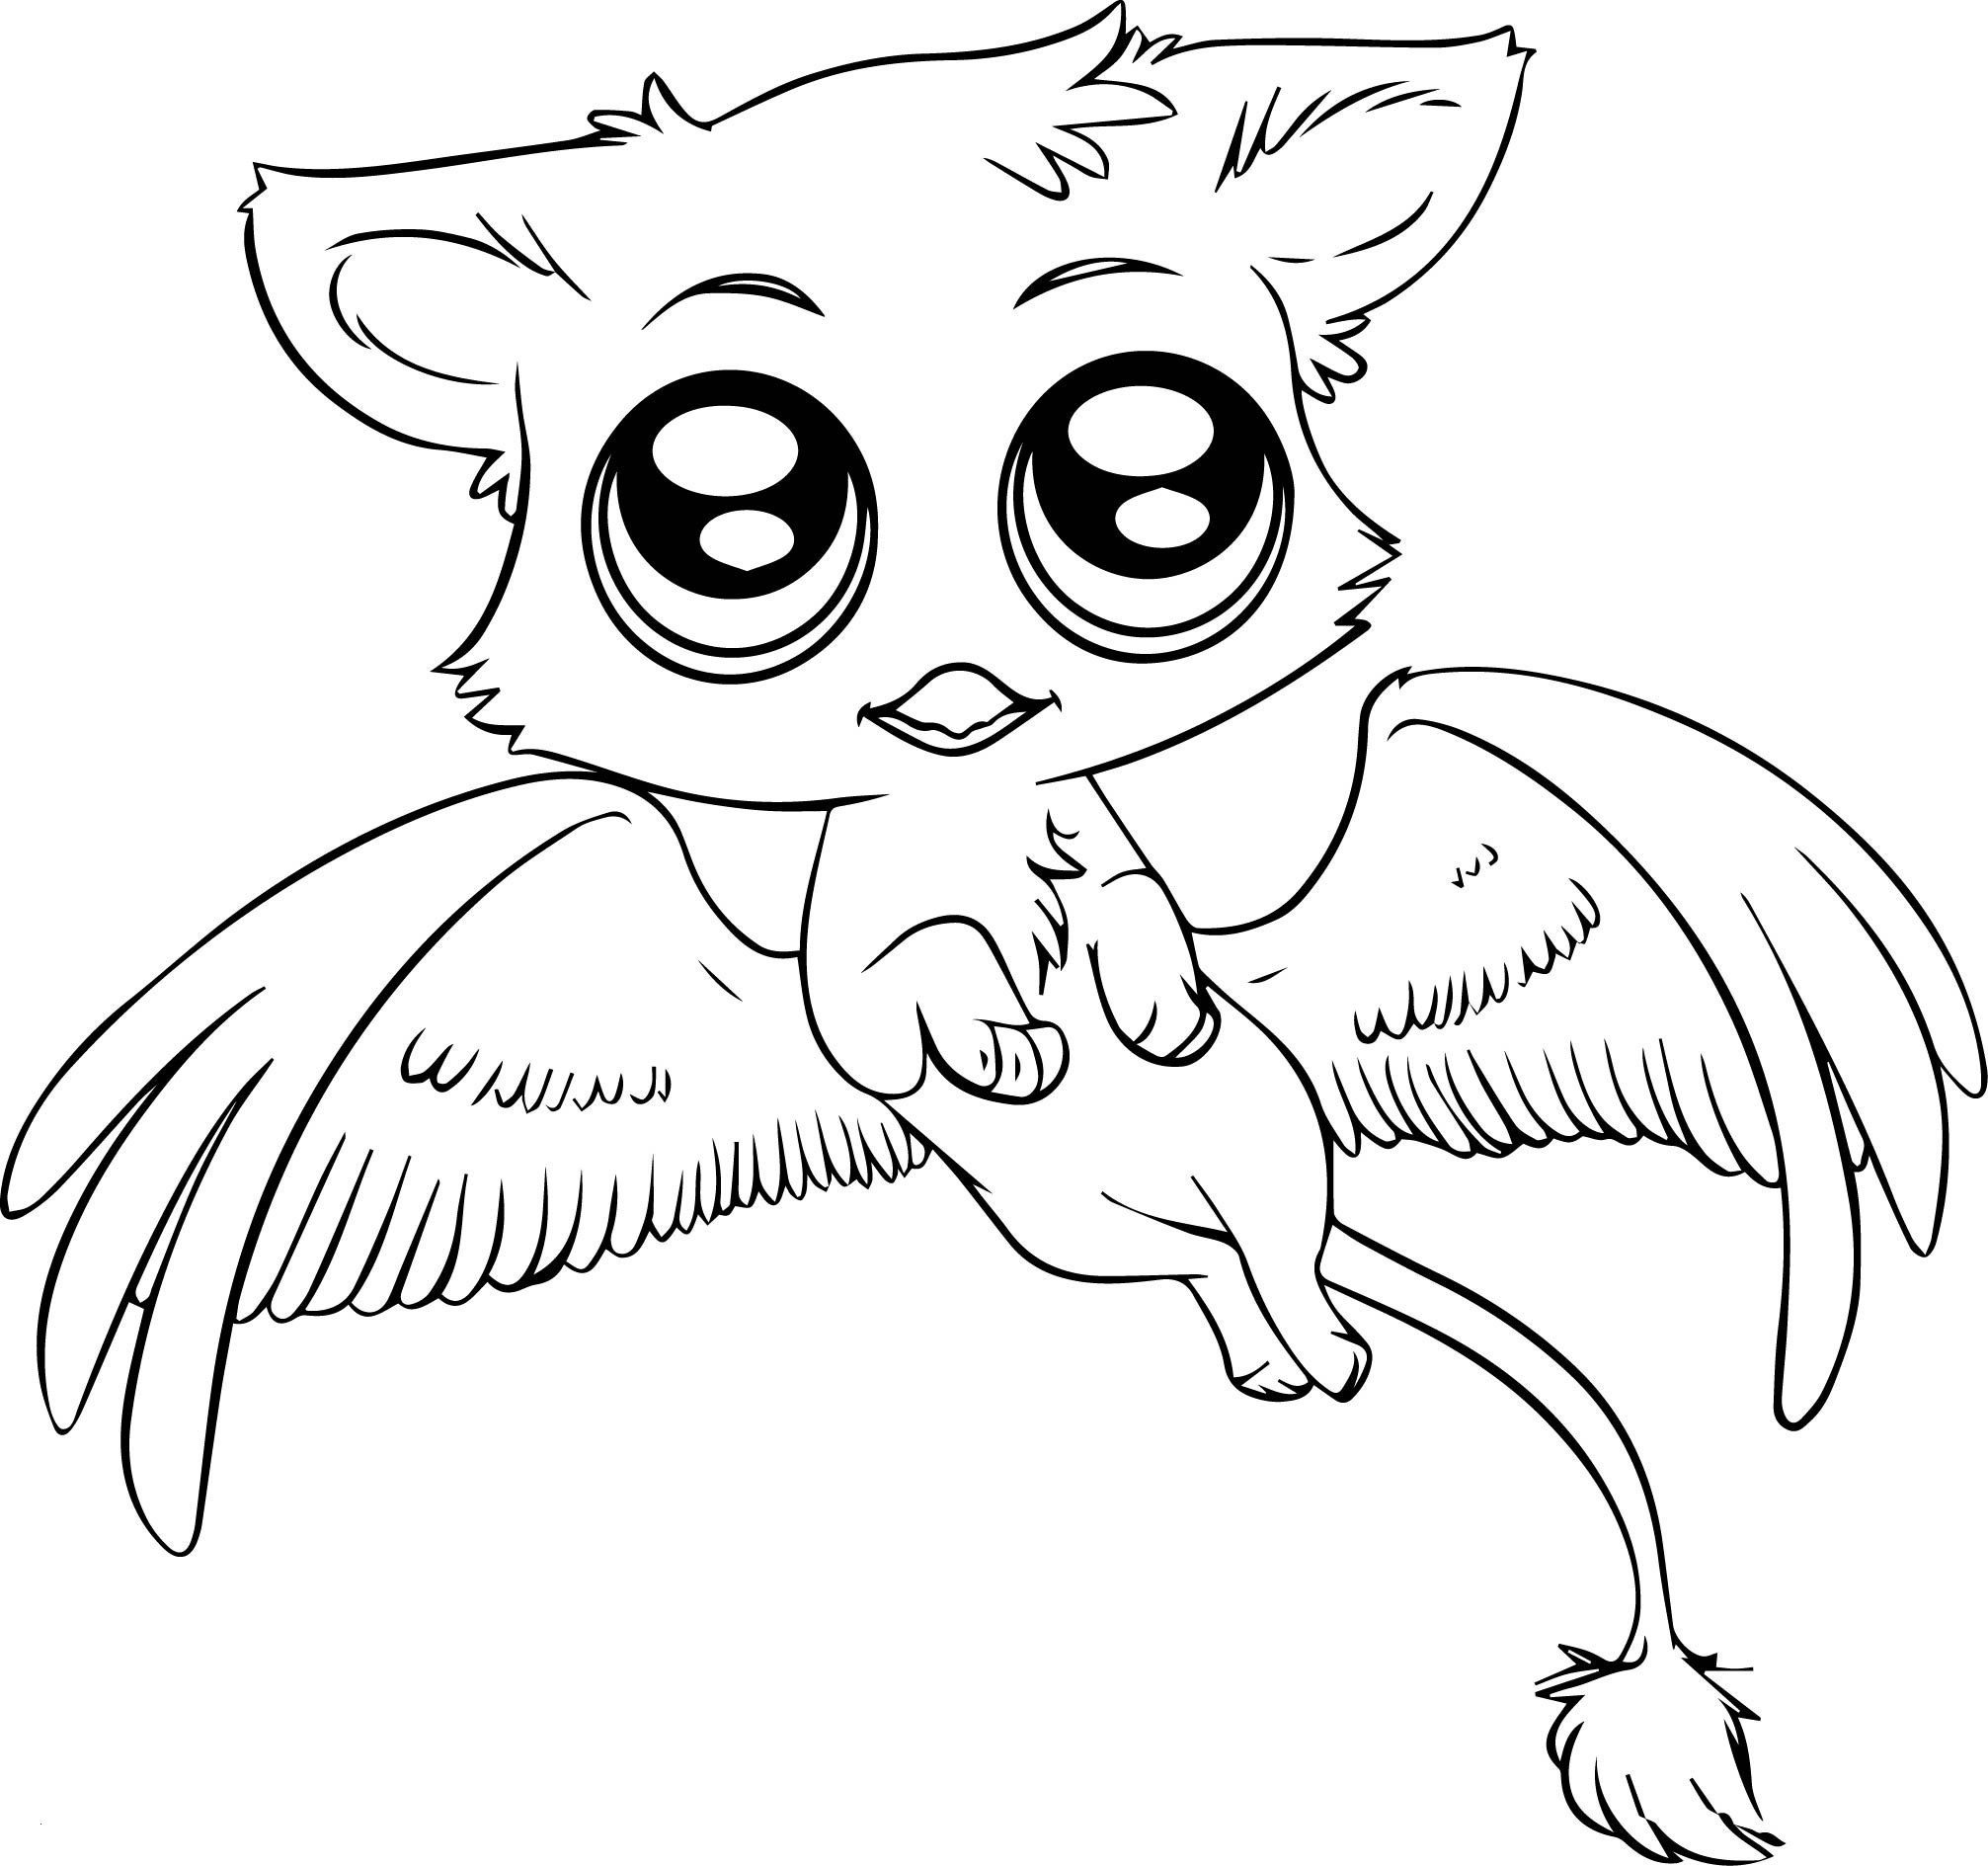 Cute Baby Animal Coloring Pages New Baby Animal Coloring Pages for Adults